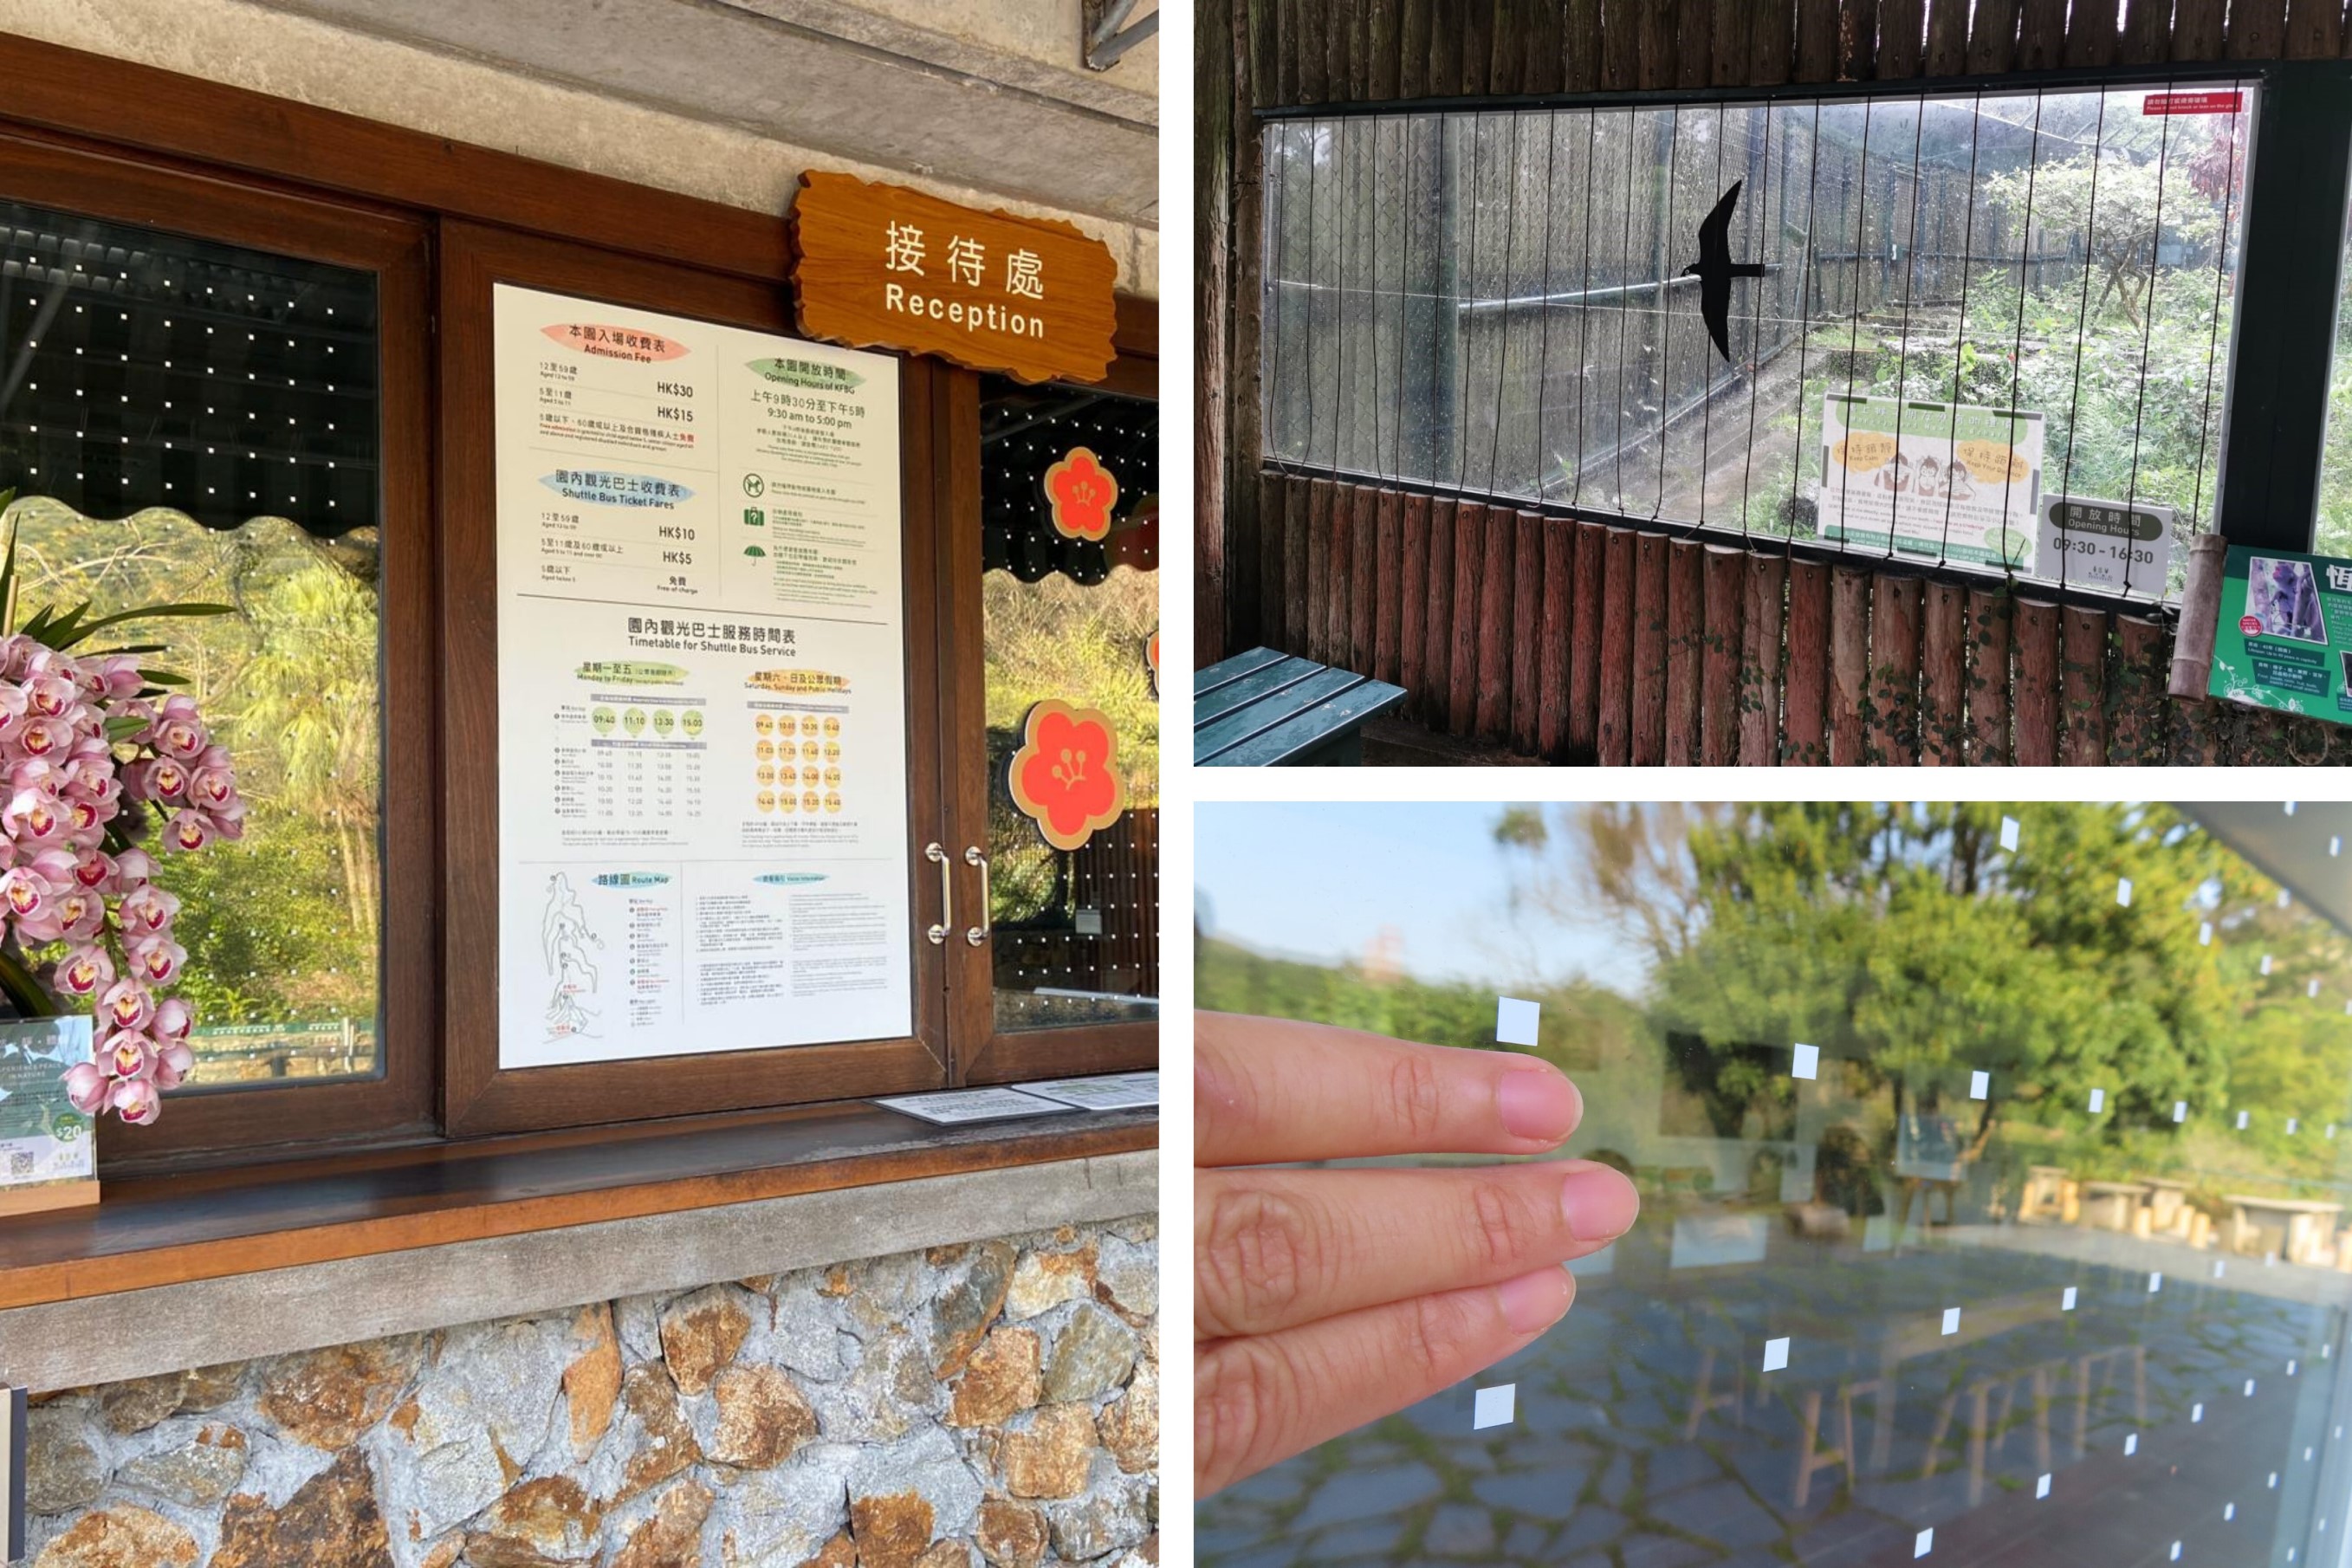 We can make windows safe for birds by adding dot patterns and stickers to glass or using less reflective glass (Photo Credit: KFBG)